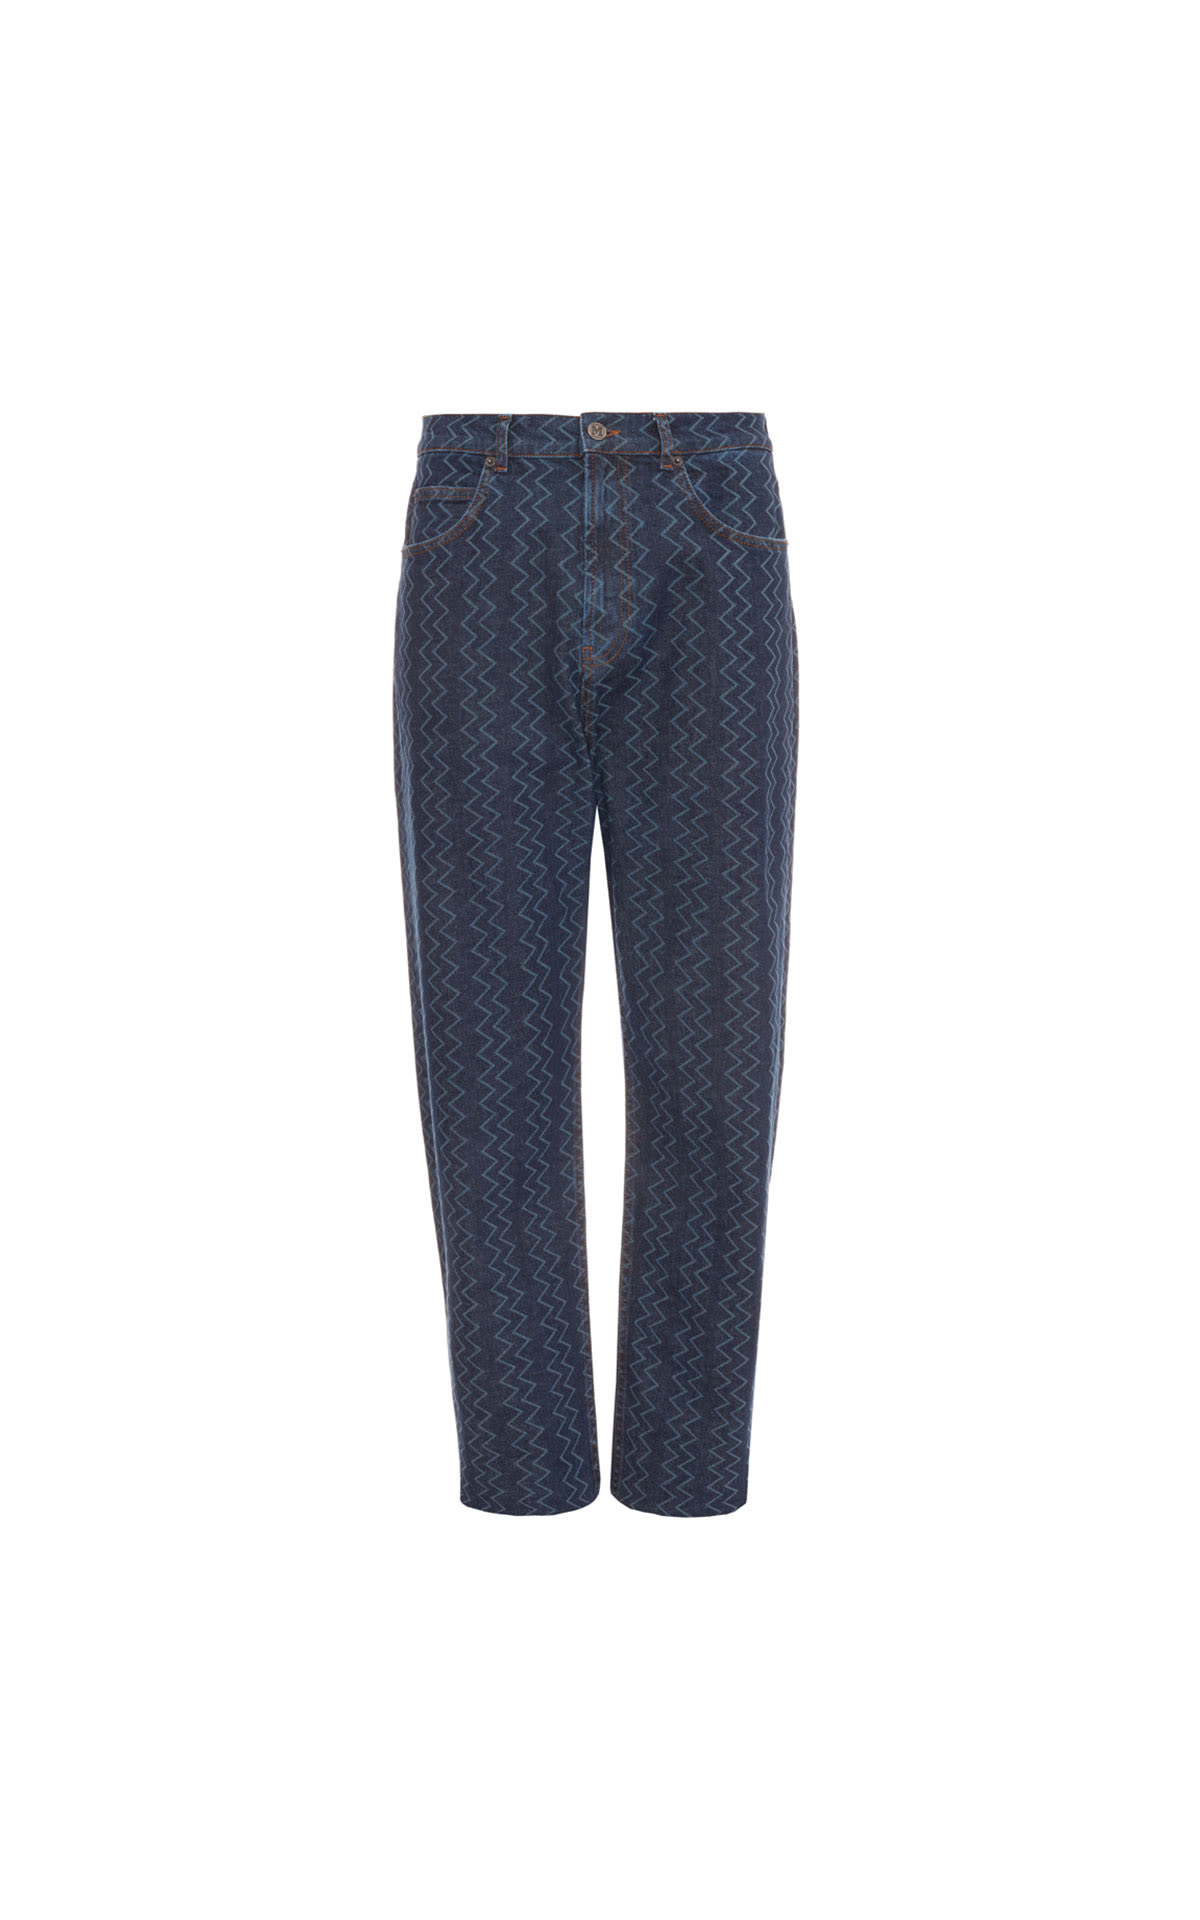 Missoni Jeans from Bicester Village